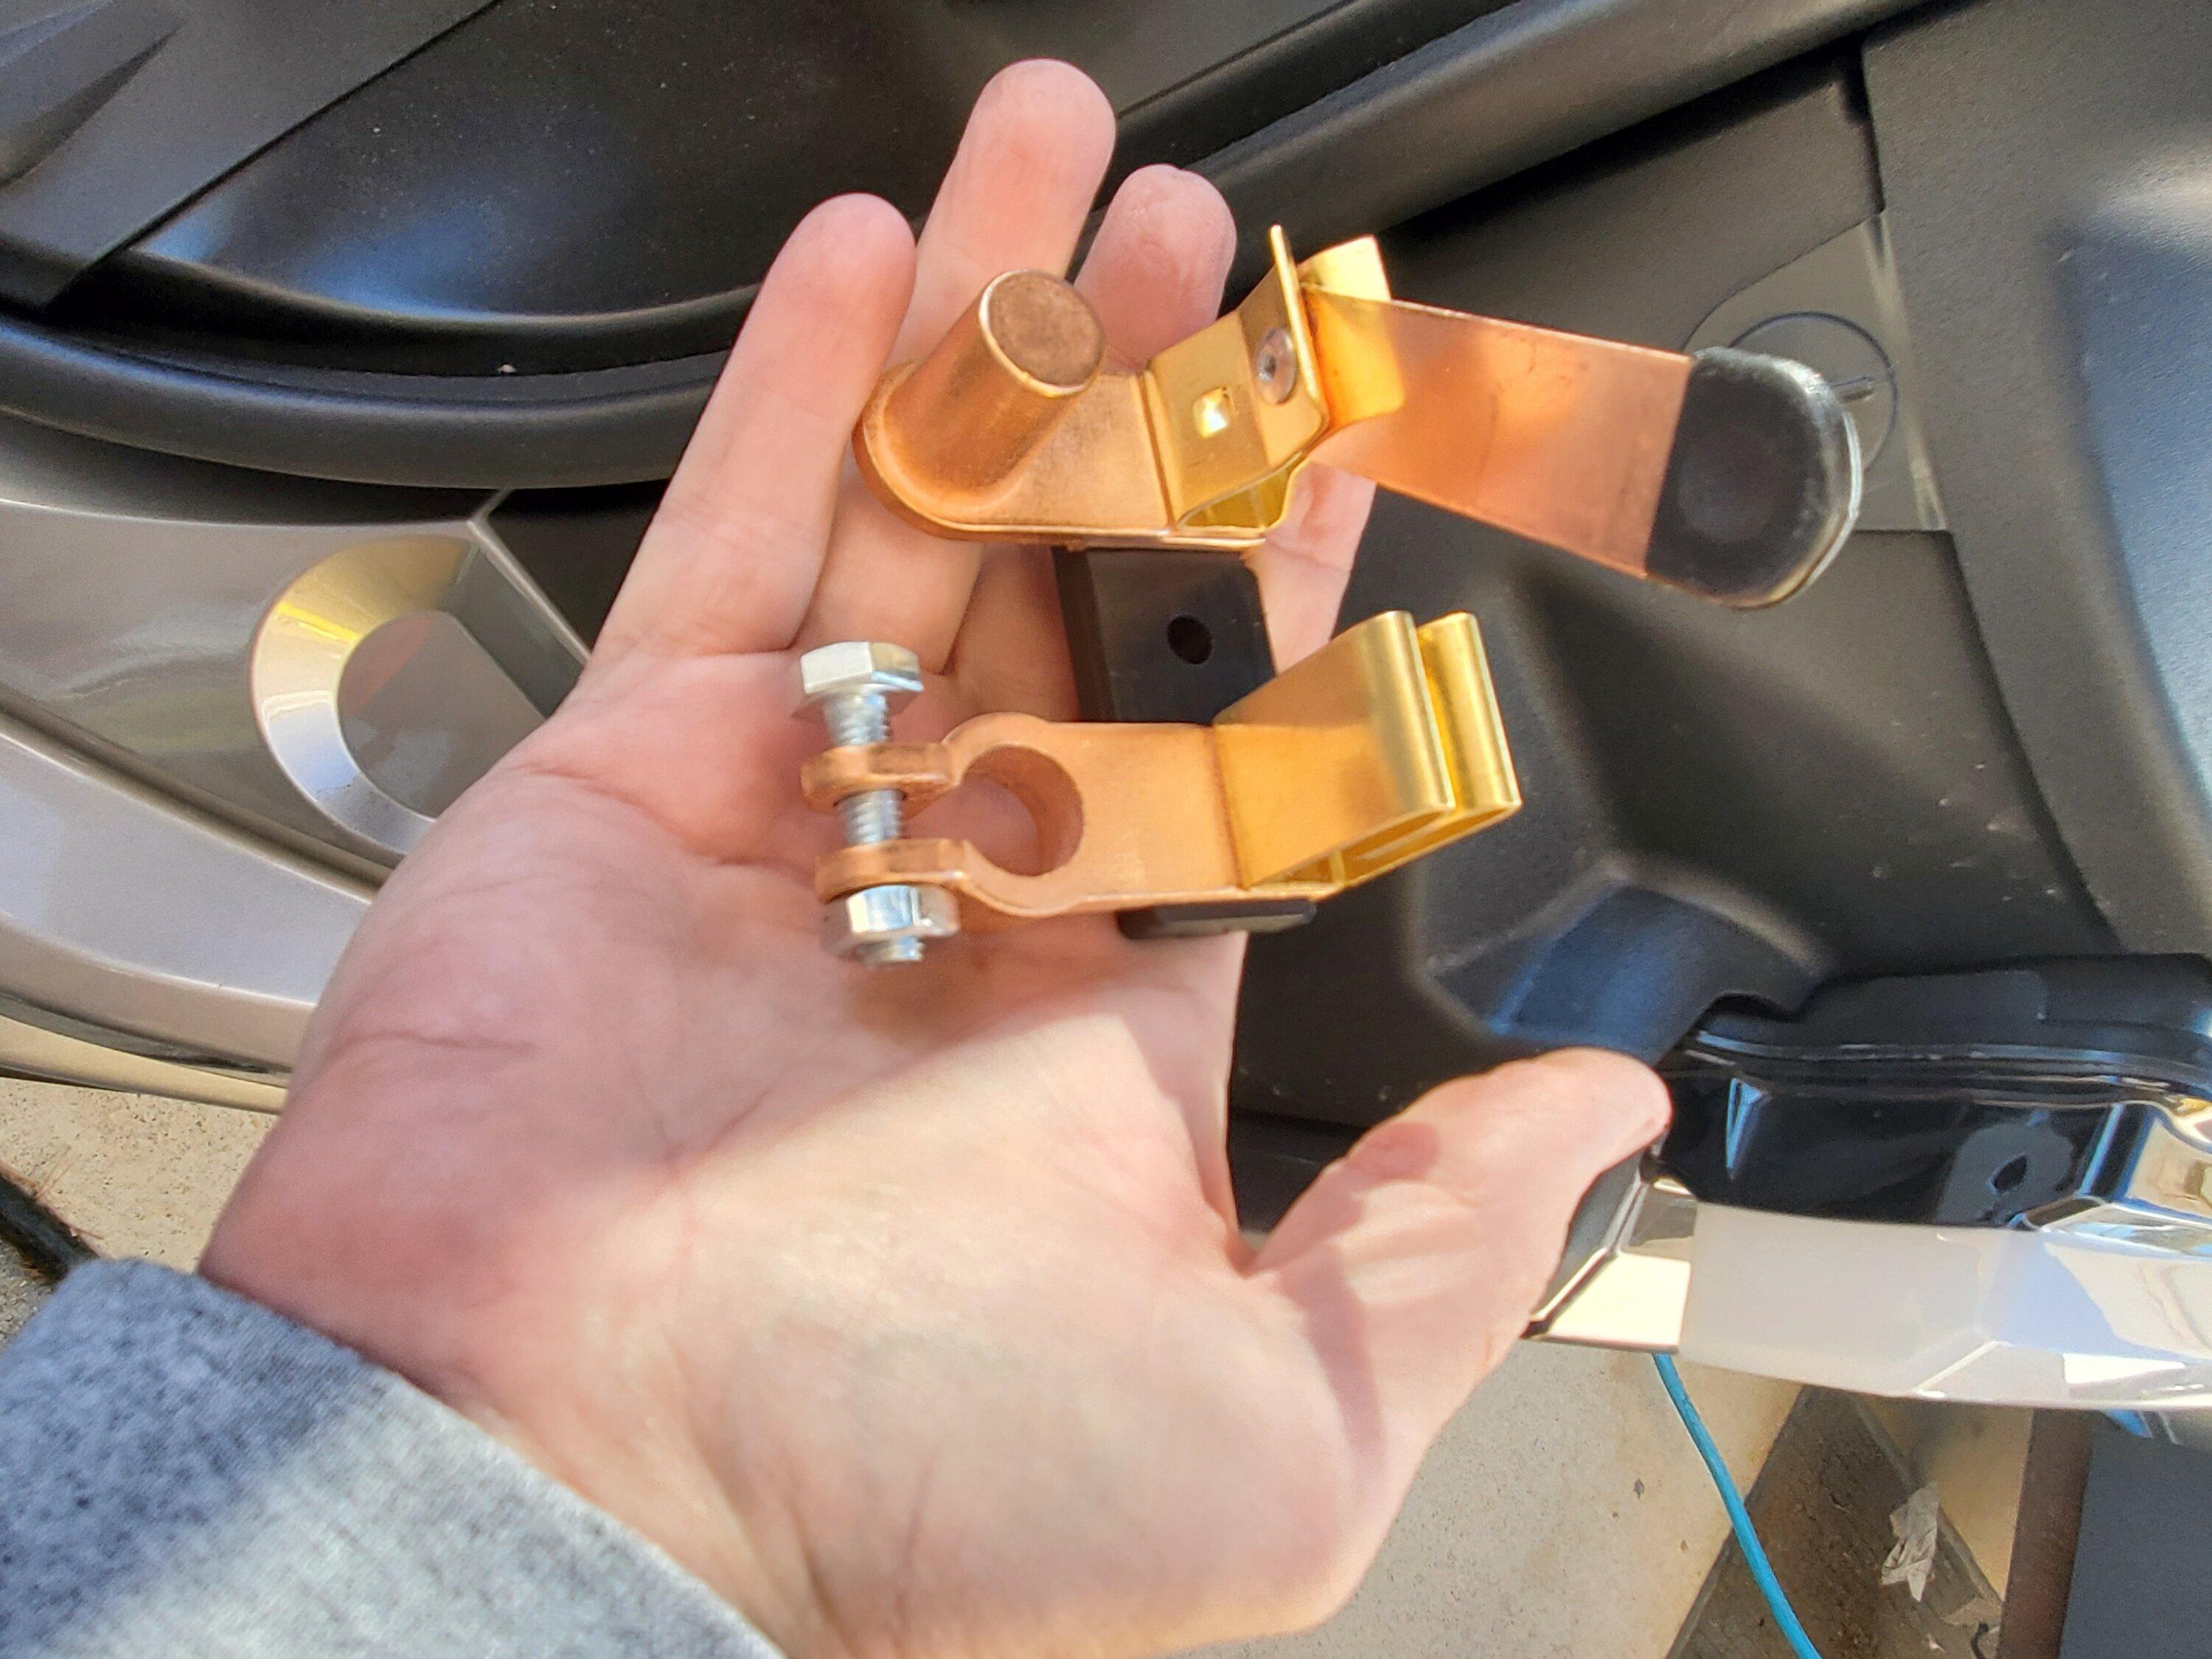 Ford F-150 Lightning 12v Battery disconnect switch installation DIY, with pics 2023-01-21 14.45.15